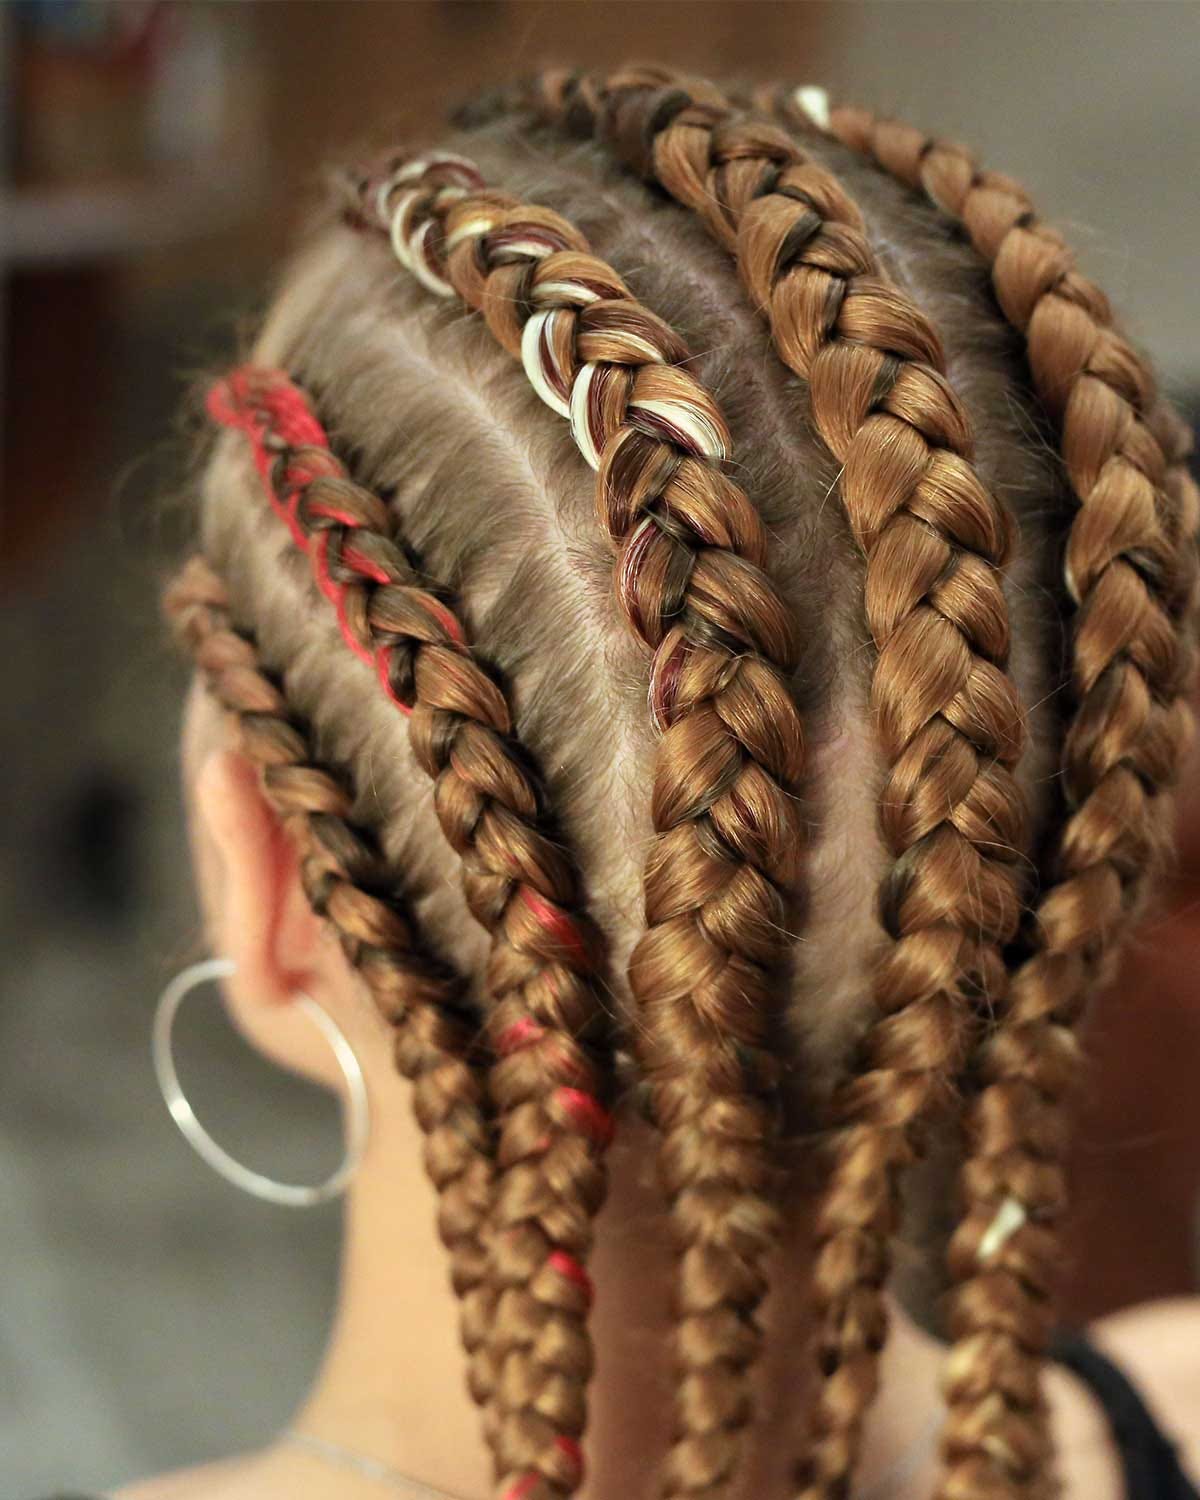 Braided Hairstyles — Because girls really like braided hairstyles